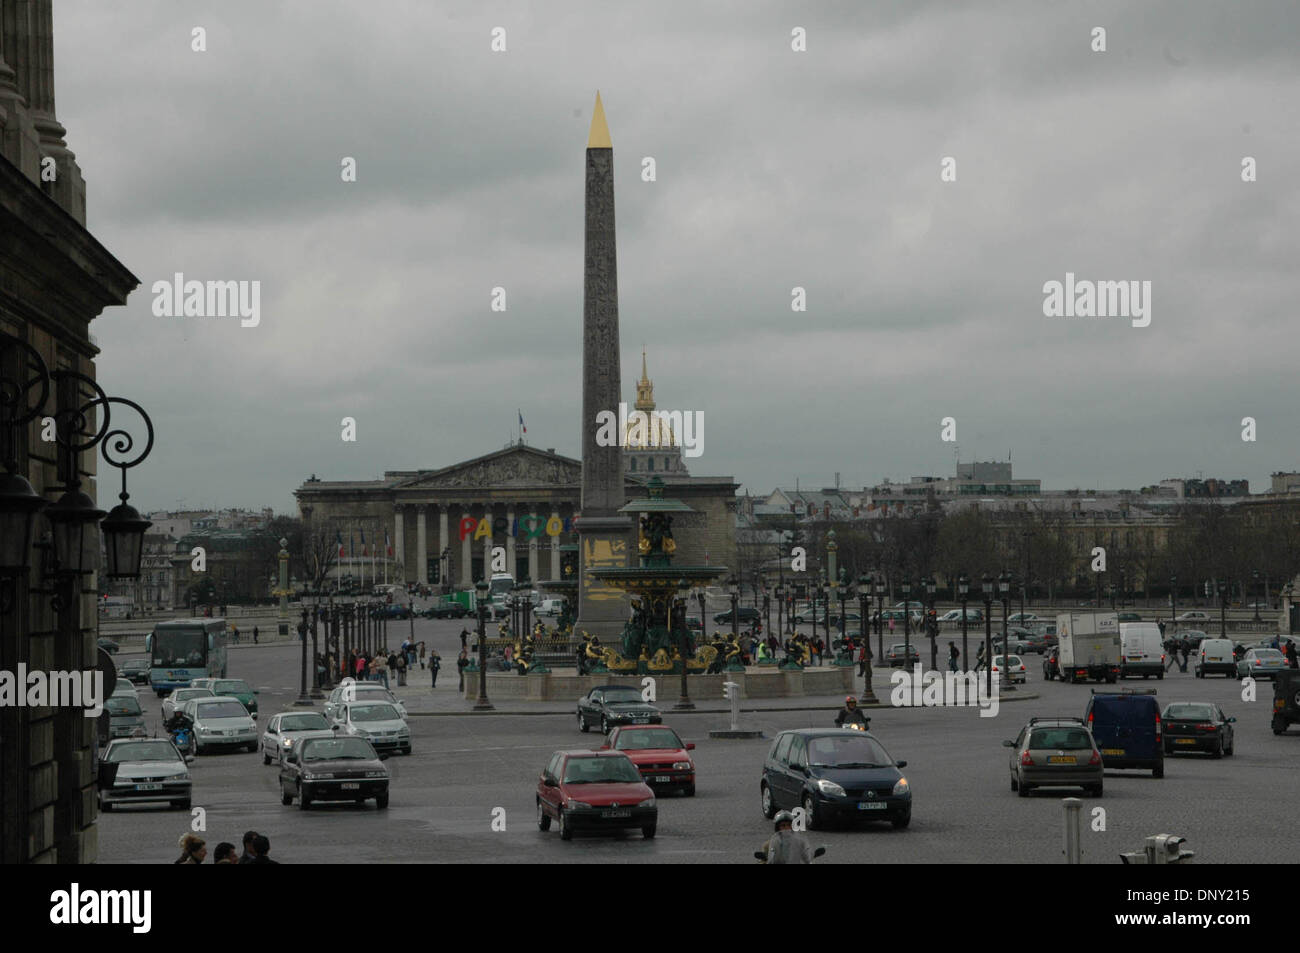 Jan 12, 2006; Paris, FRANCE; The Obelisque de Luxor is an octogonal shaped monument and is the place of Louix XVI's execution. It is located in the Place de la Concorde which is the largest public square in Paris, France. Mandatory Credit: Photo by Tina Fultz/ZUMA Press. (©) Copyright 2006 by Tina Fultz Stock Photo